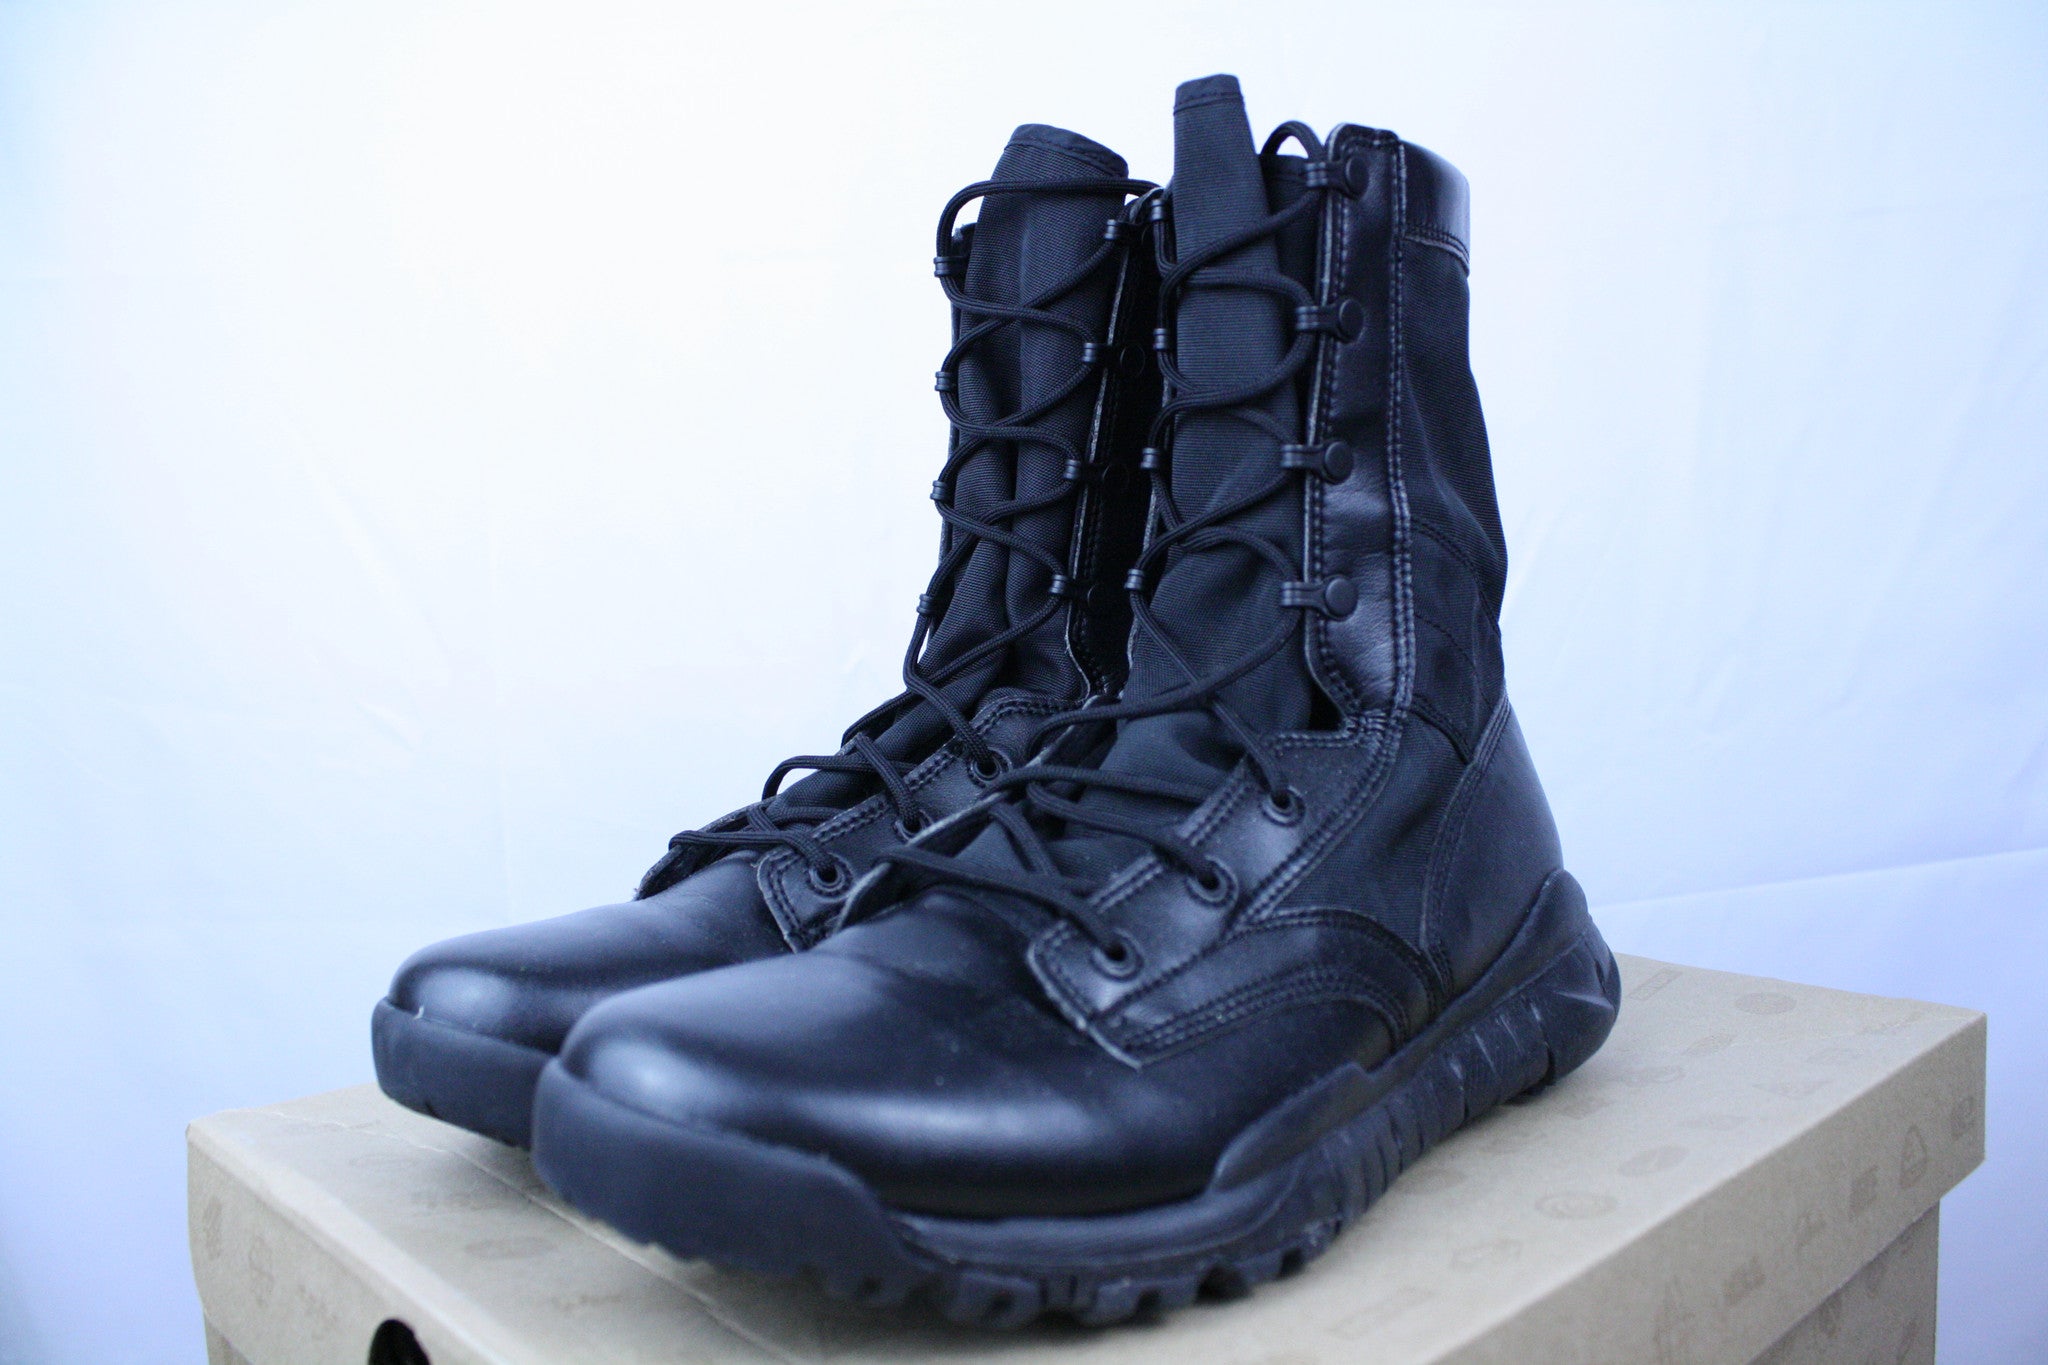 Nike Special Field Boot (Black Leather) - 11